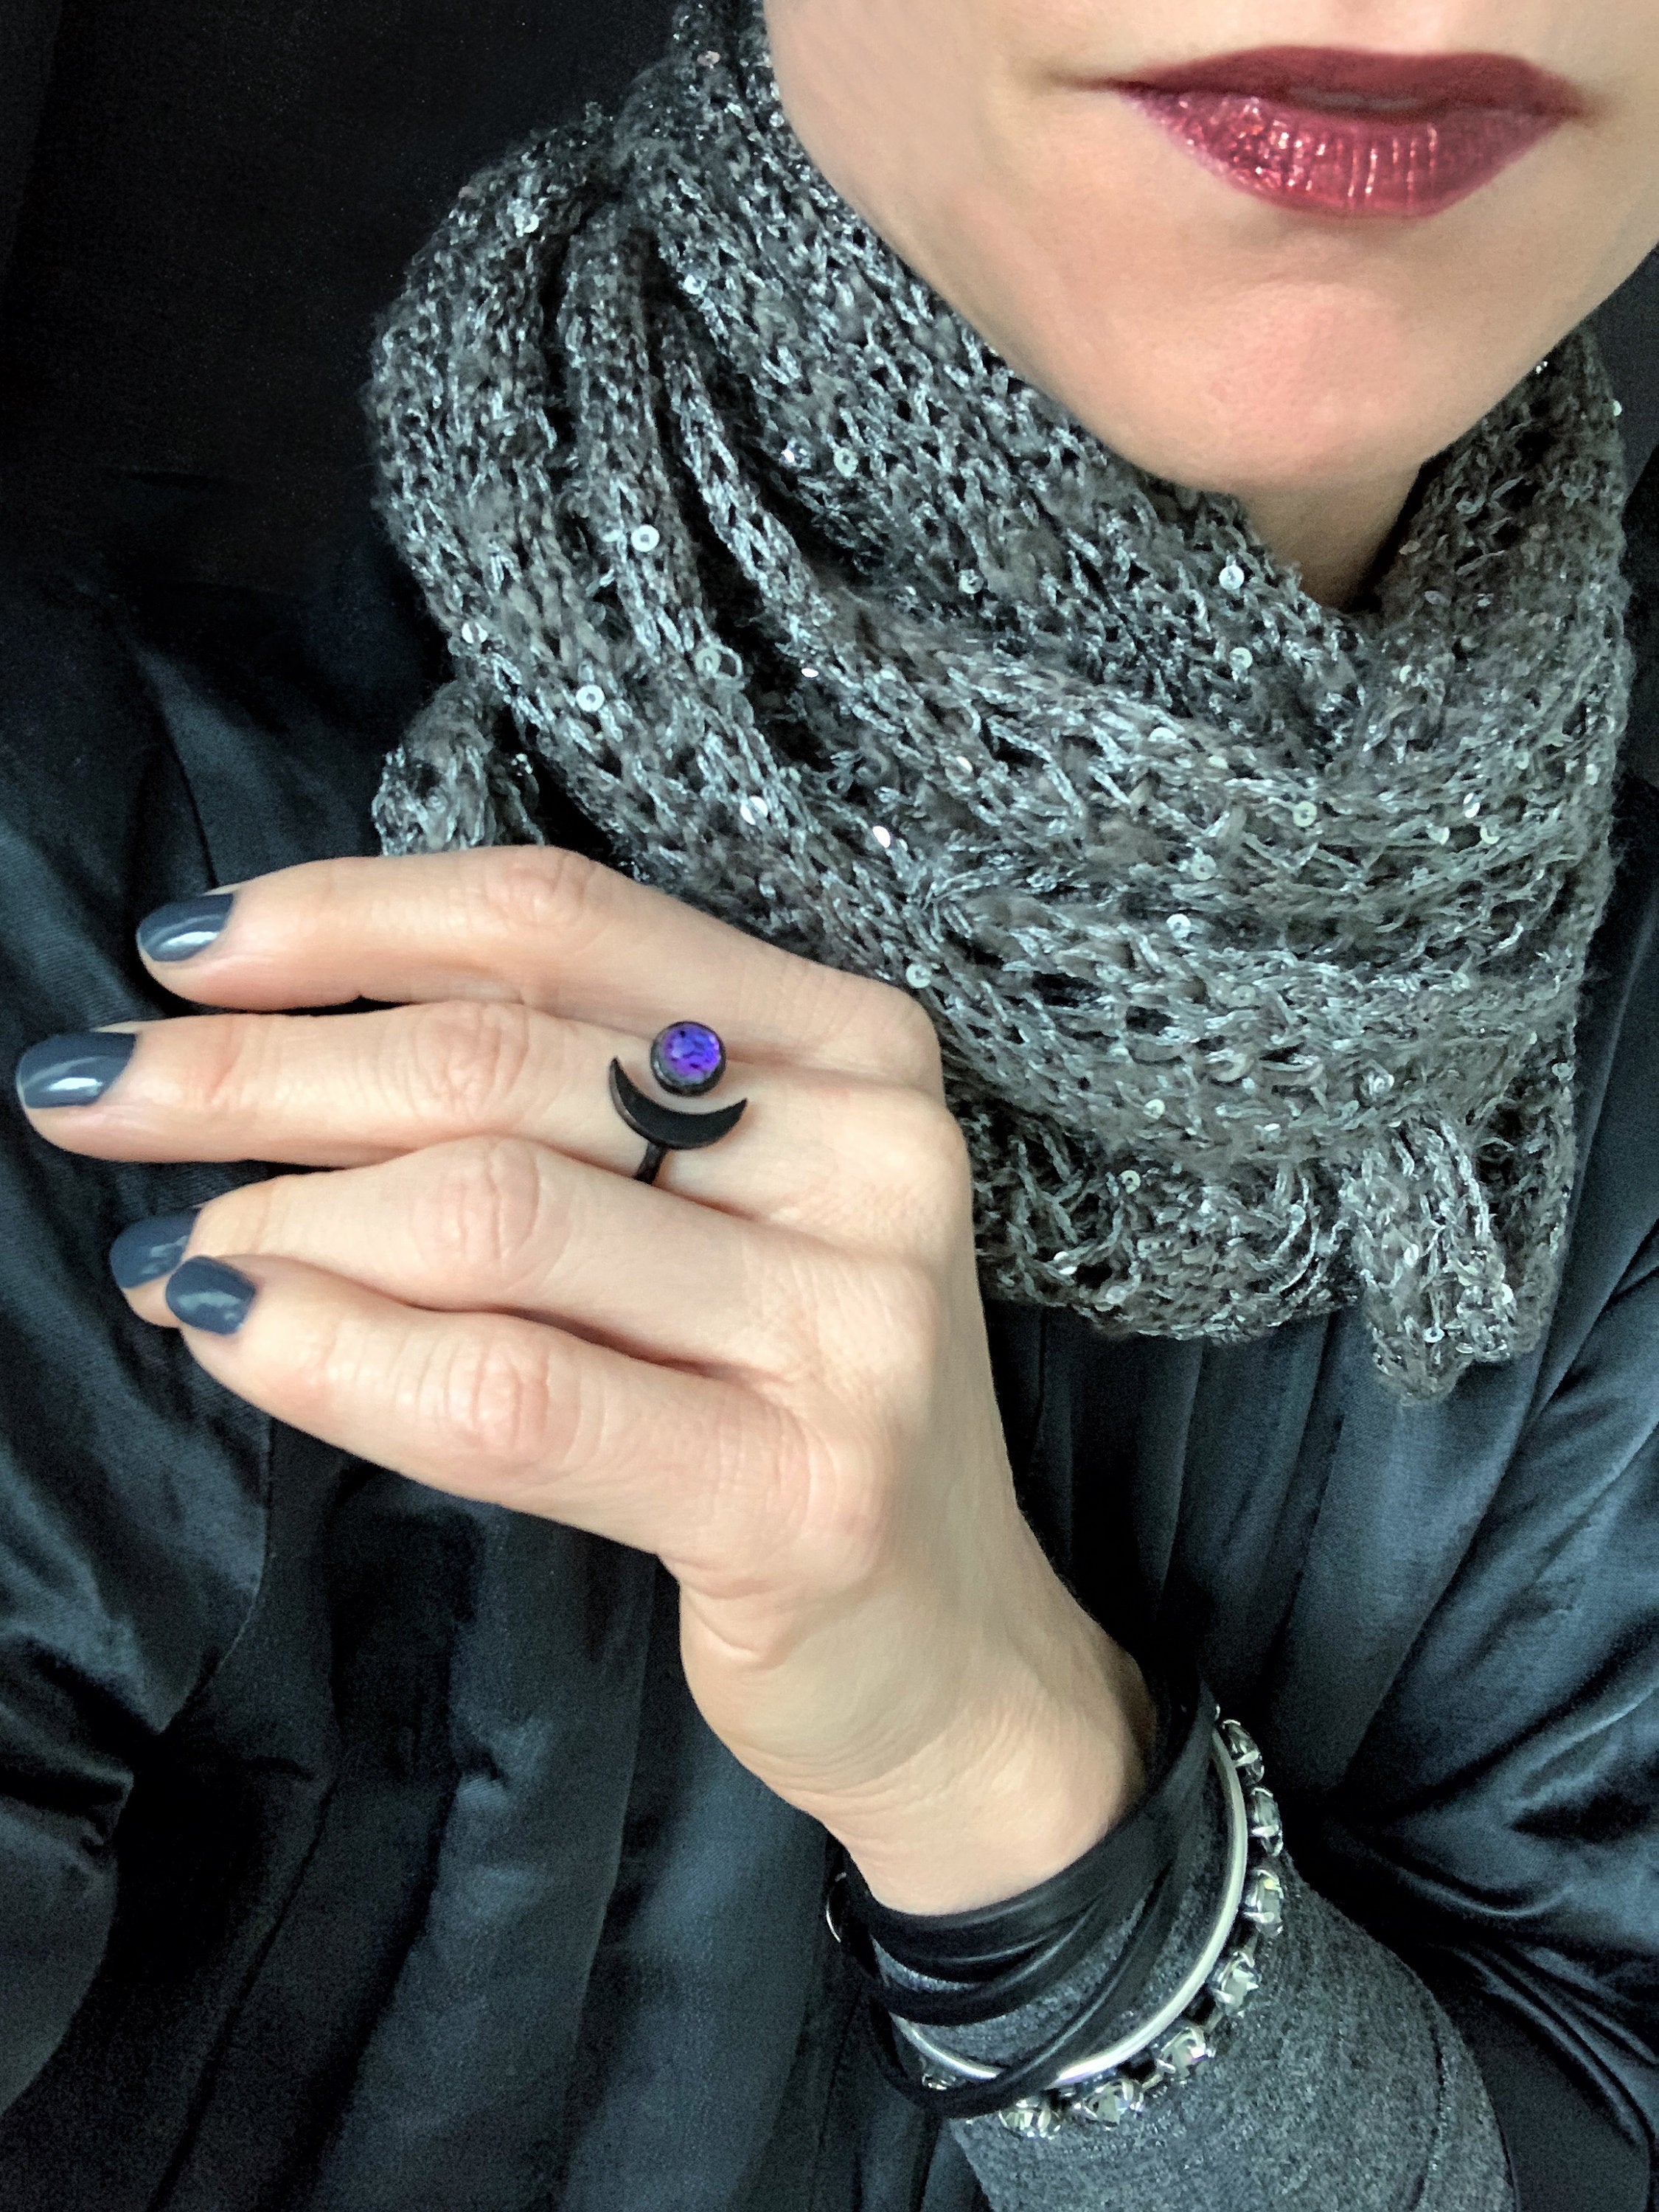 CELESTIAL - Black Cresent Moon Ring with Purple Vintage Swarovski Crystal - Mystical Gift for Teen Girl, Teenager, Women - Moon Jewelry